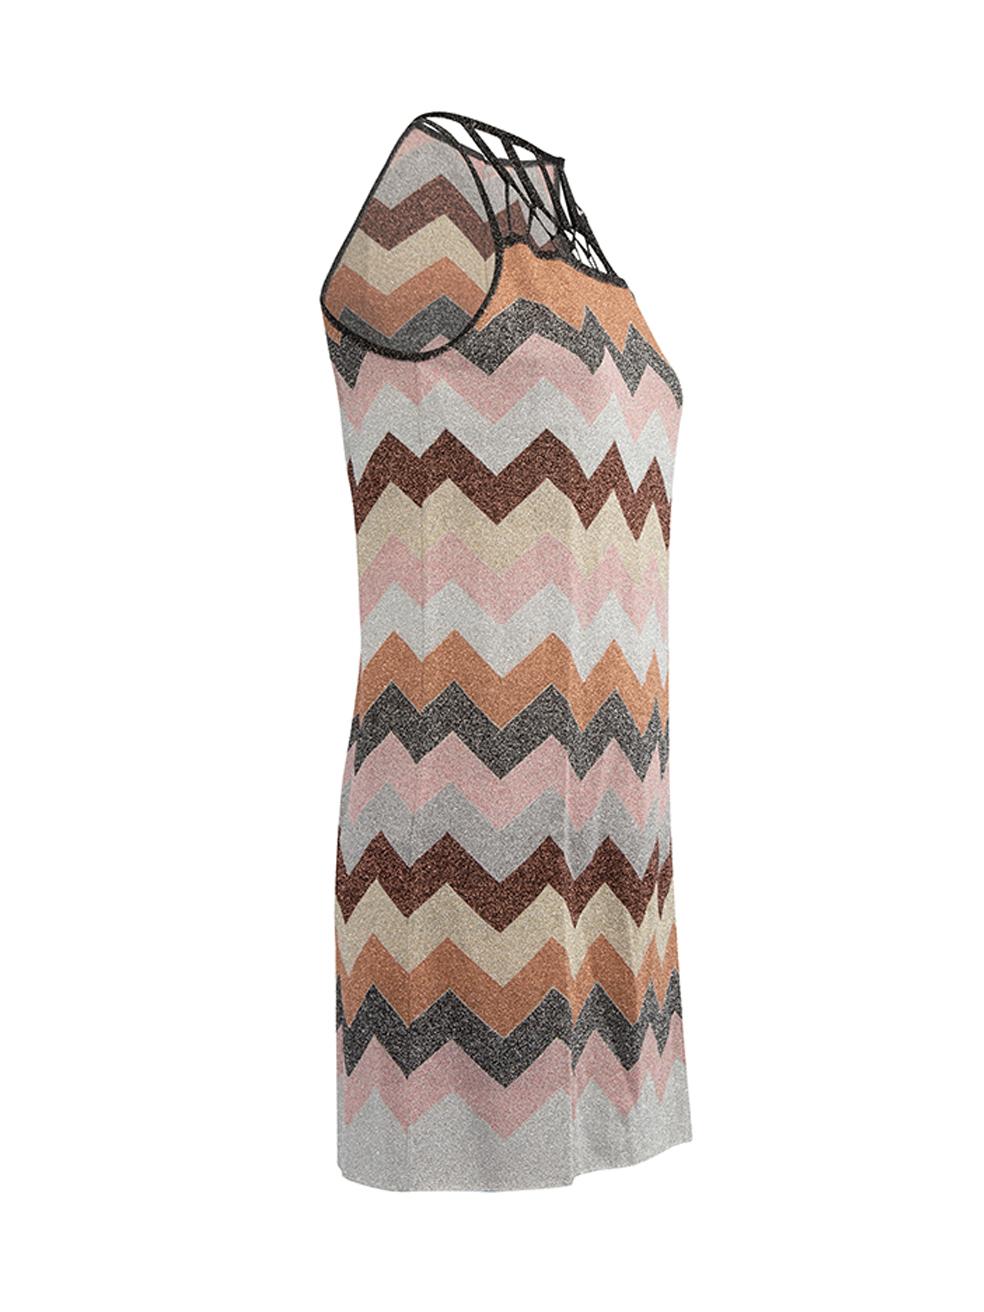 CONDITION is Very good. Hardly any visible wear to dress is evident on this used Missoni designer resale item. Details Multicolour Synthetic Mini sleeveless dress Chevron stripes pattern Webby halter neck Metallic threading Back zip closure with